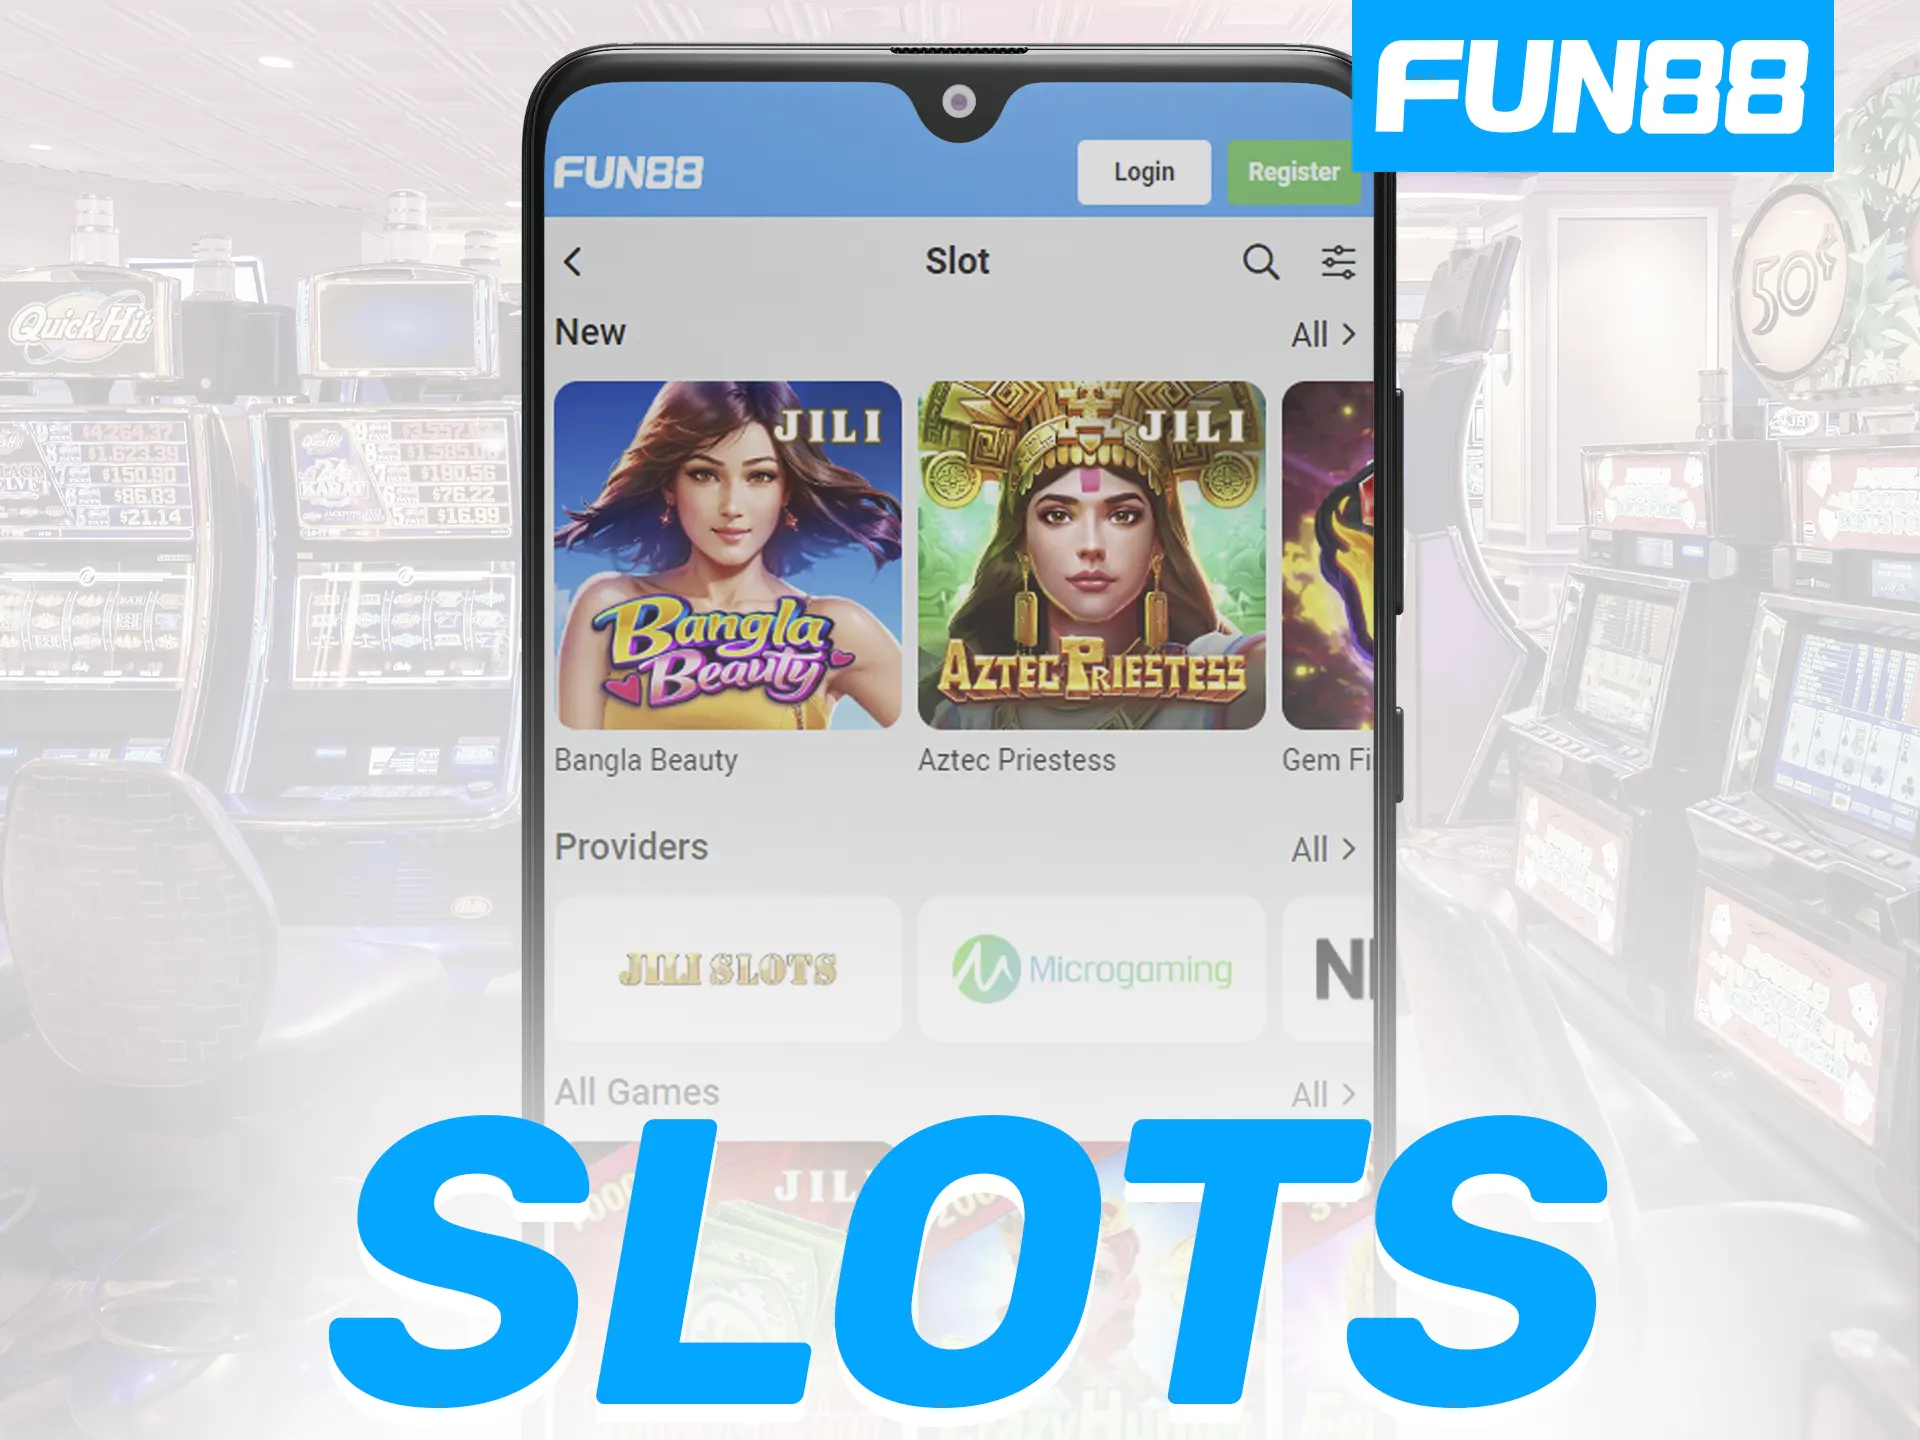 Fun88 app offers a big numbers of slots from different providers.